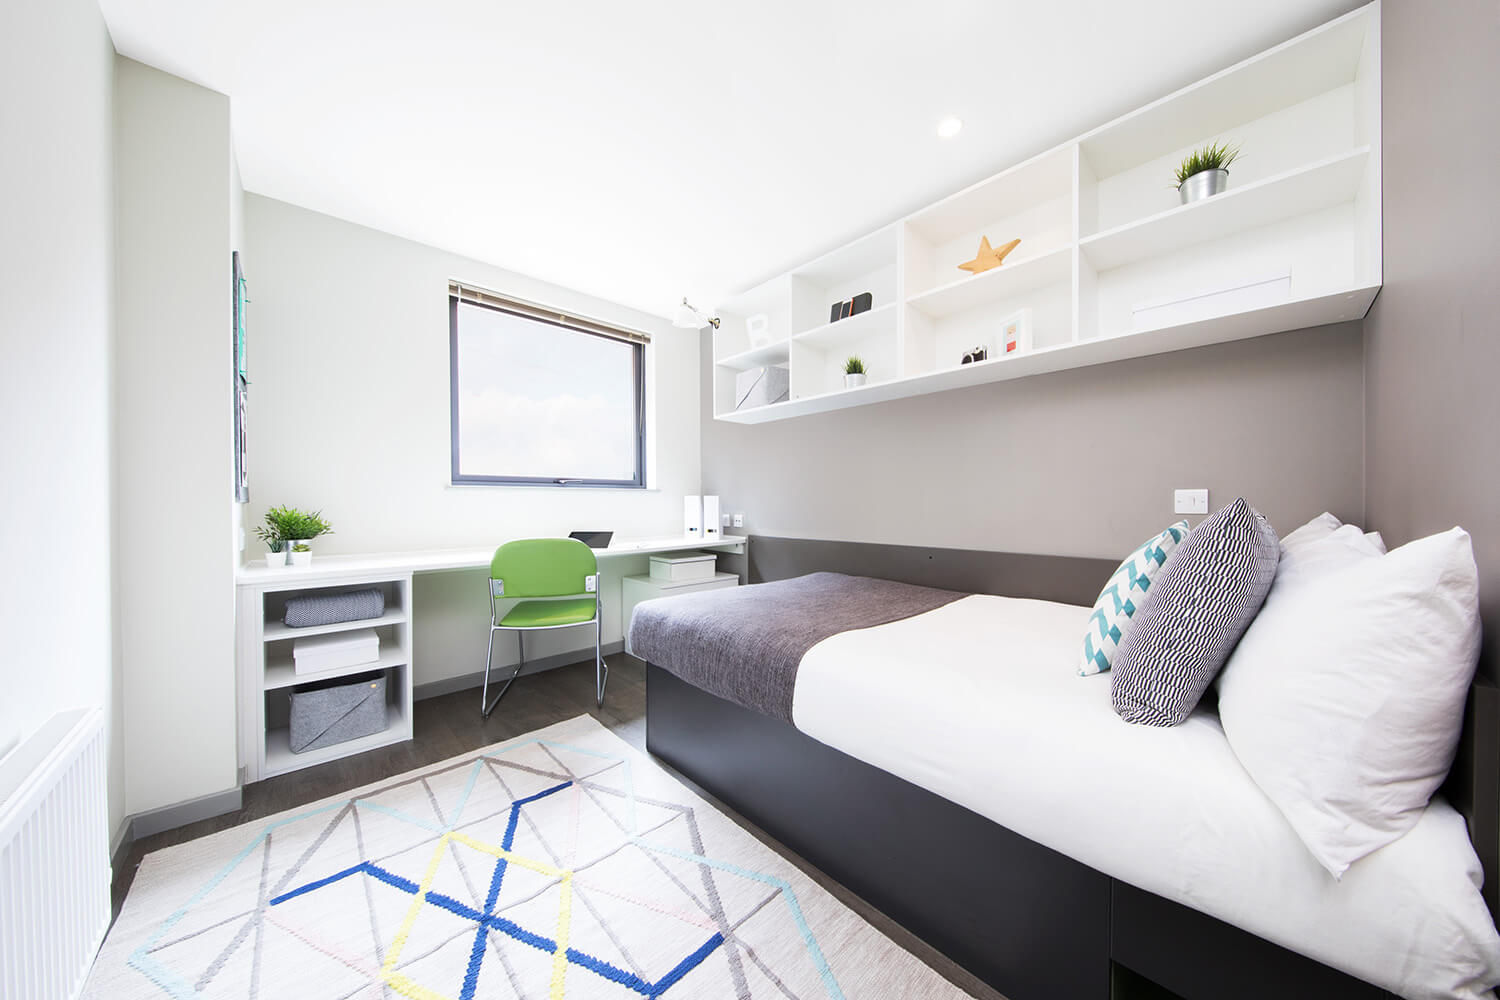 Student accommodation London en-suite room at St Pancras Way